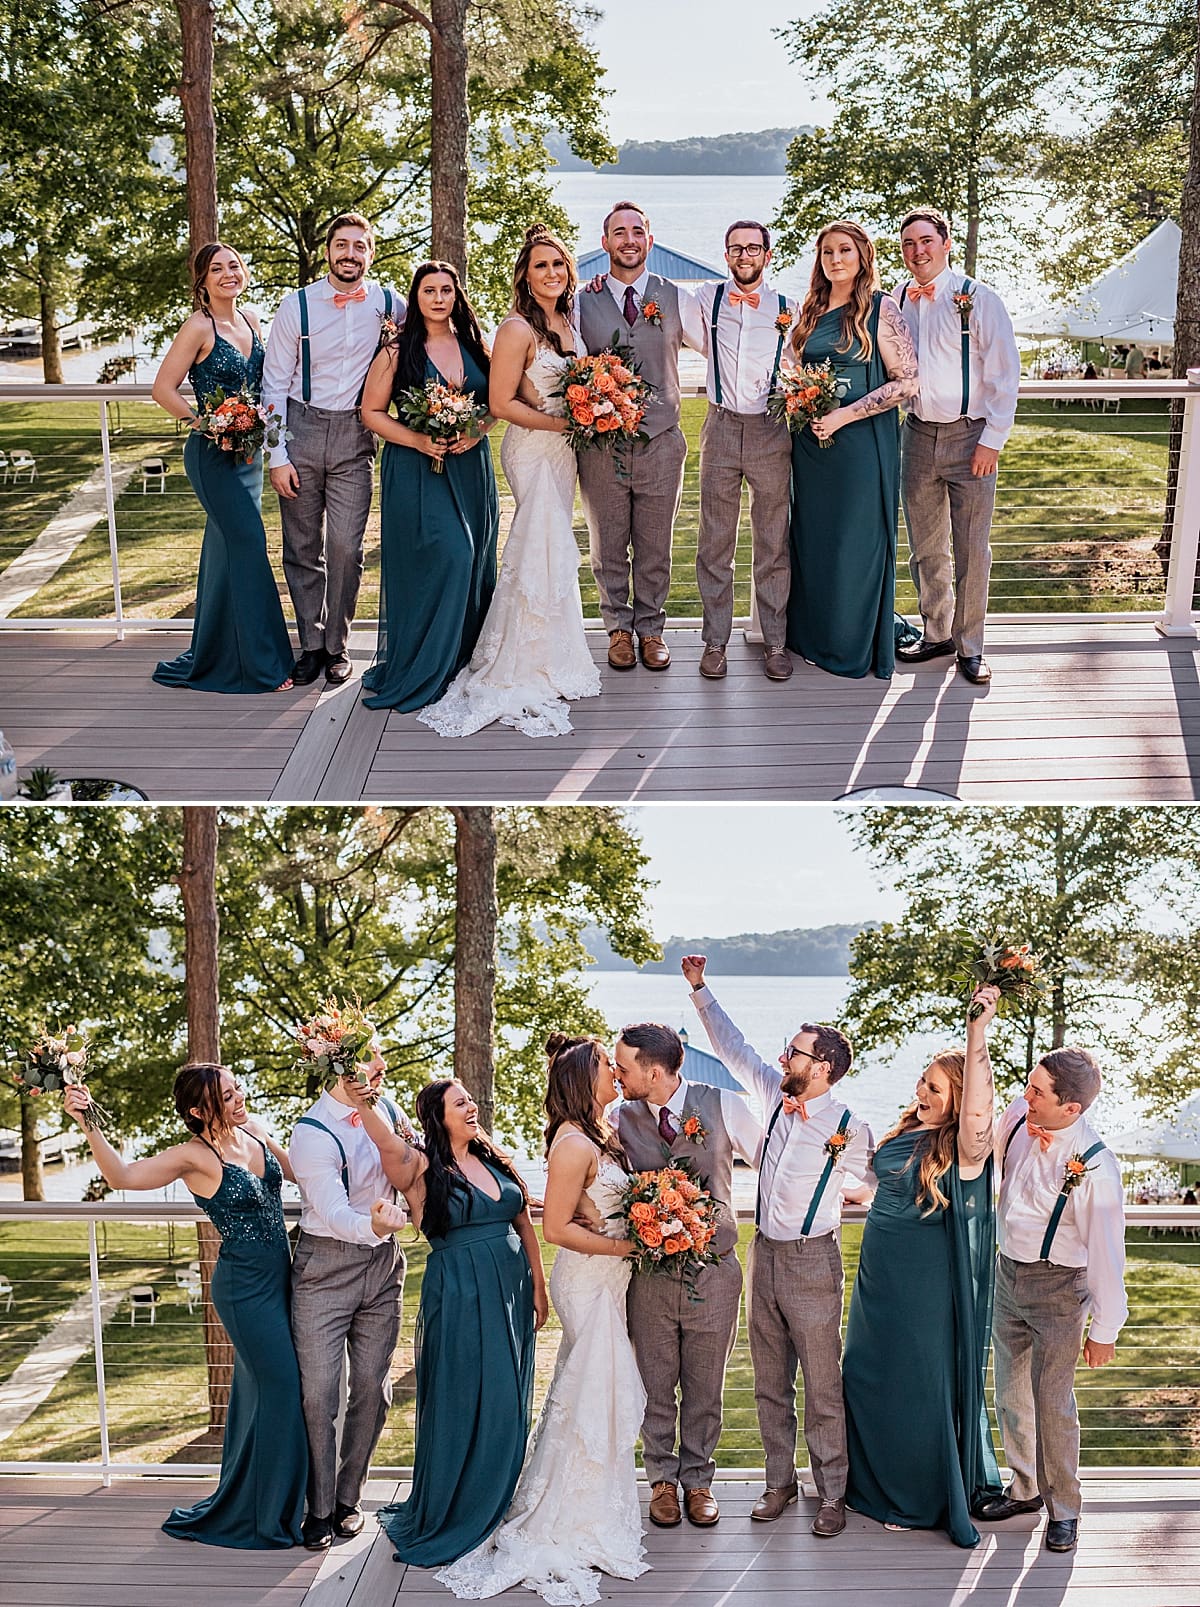 wedding party on the balcony of a lake house